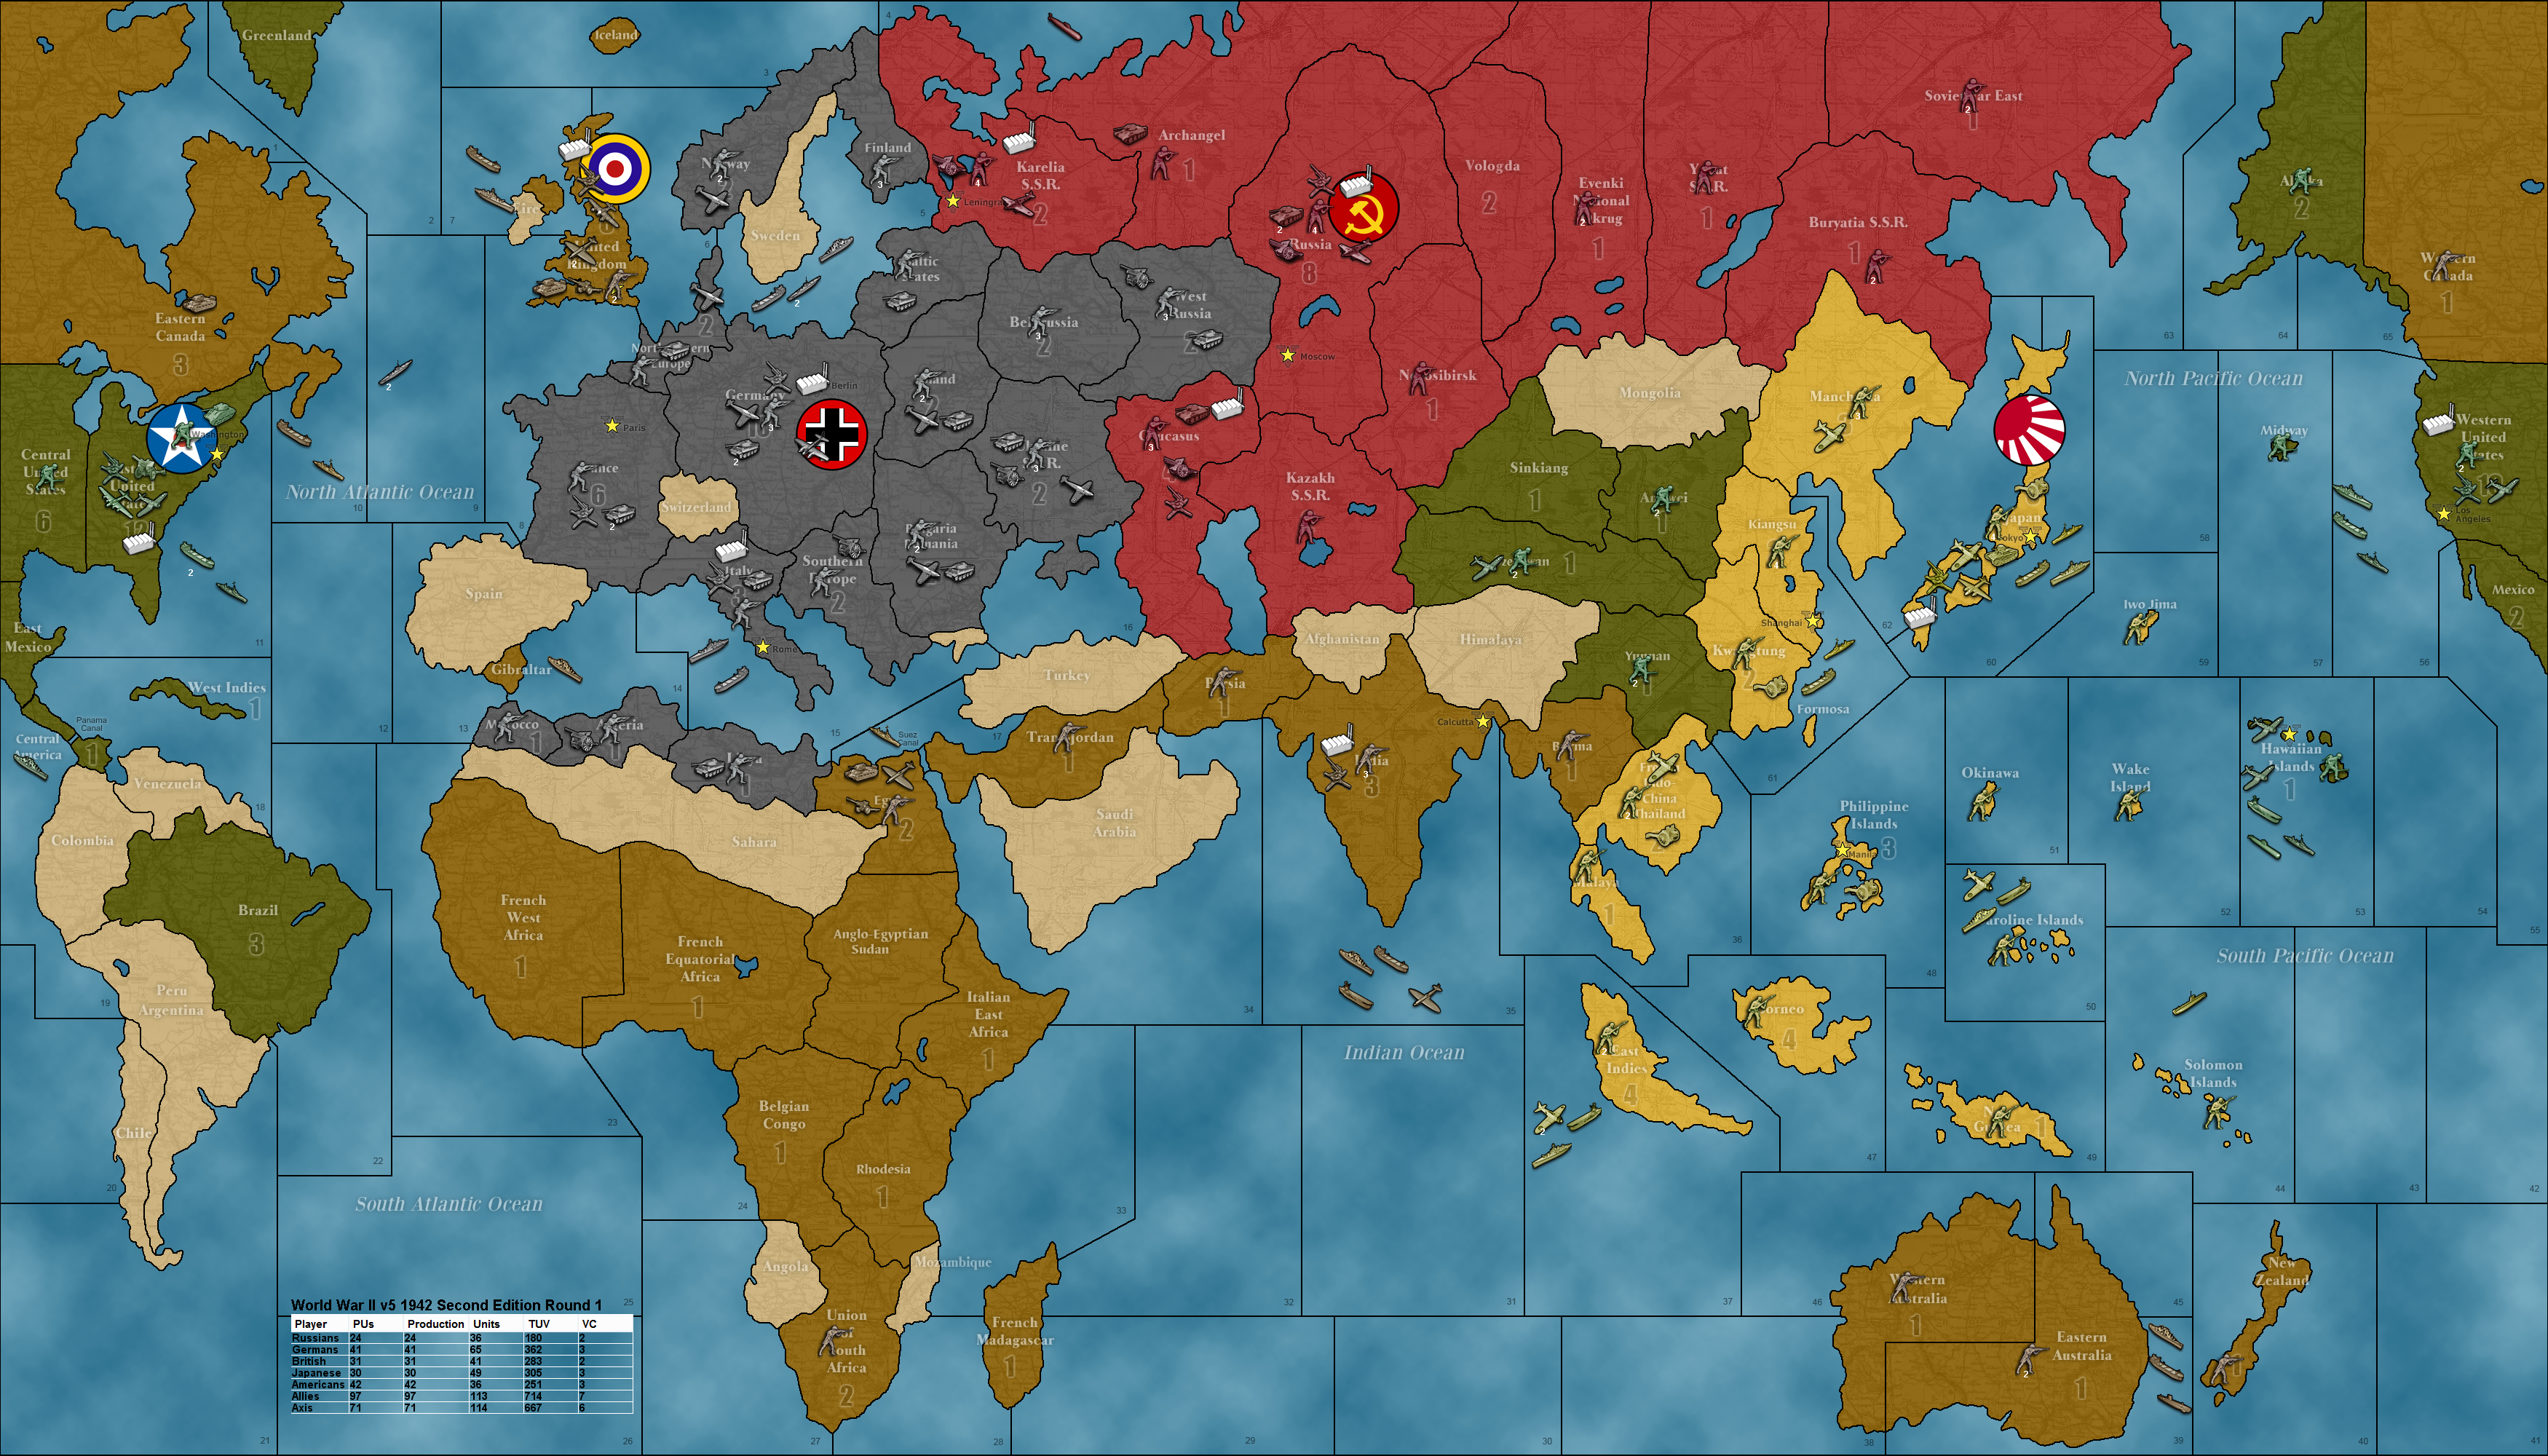 axis and allies global 1942